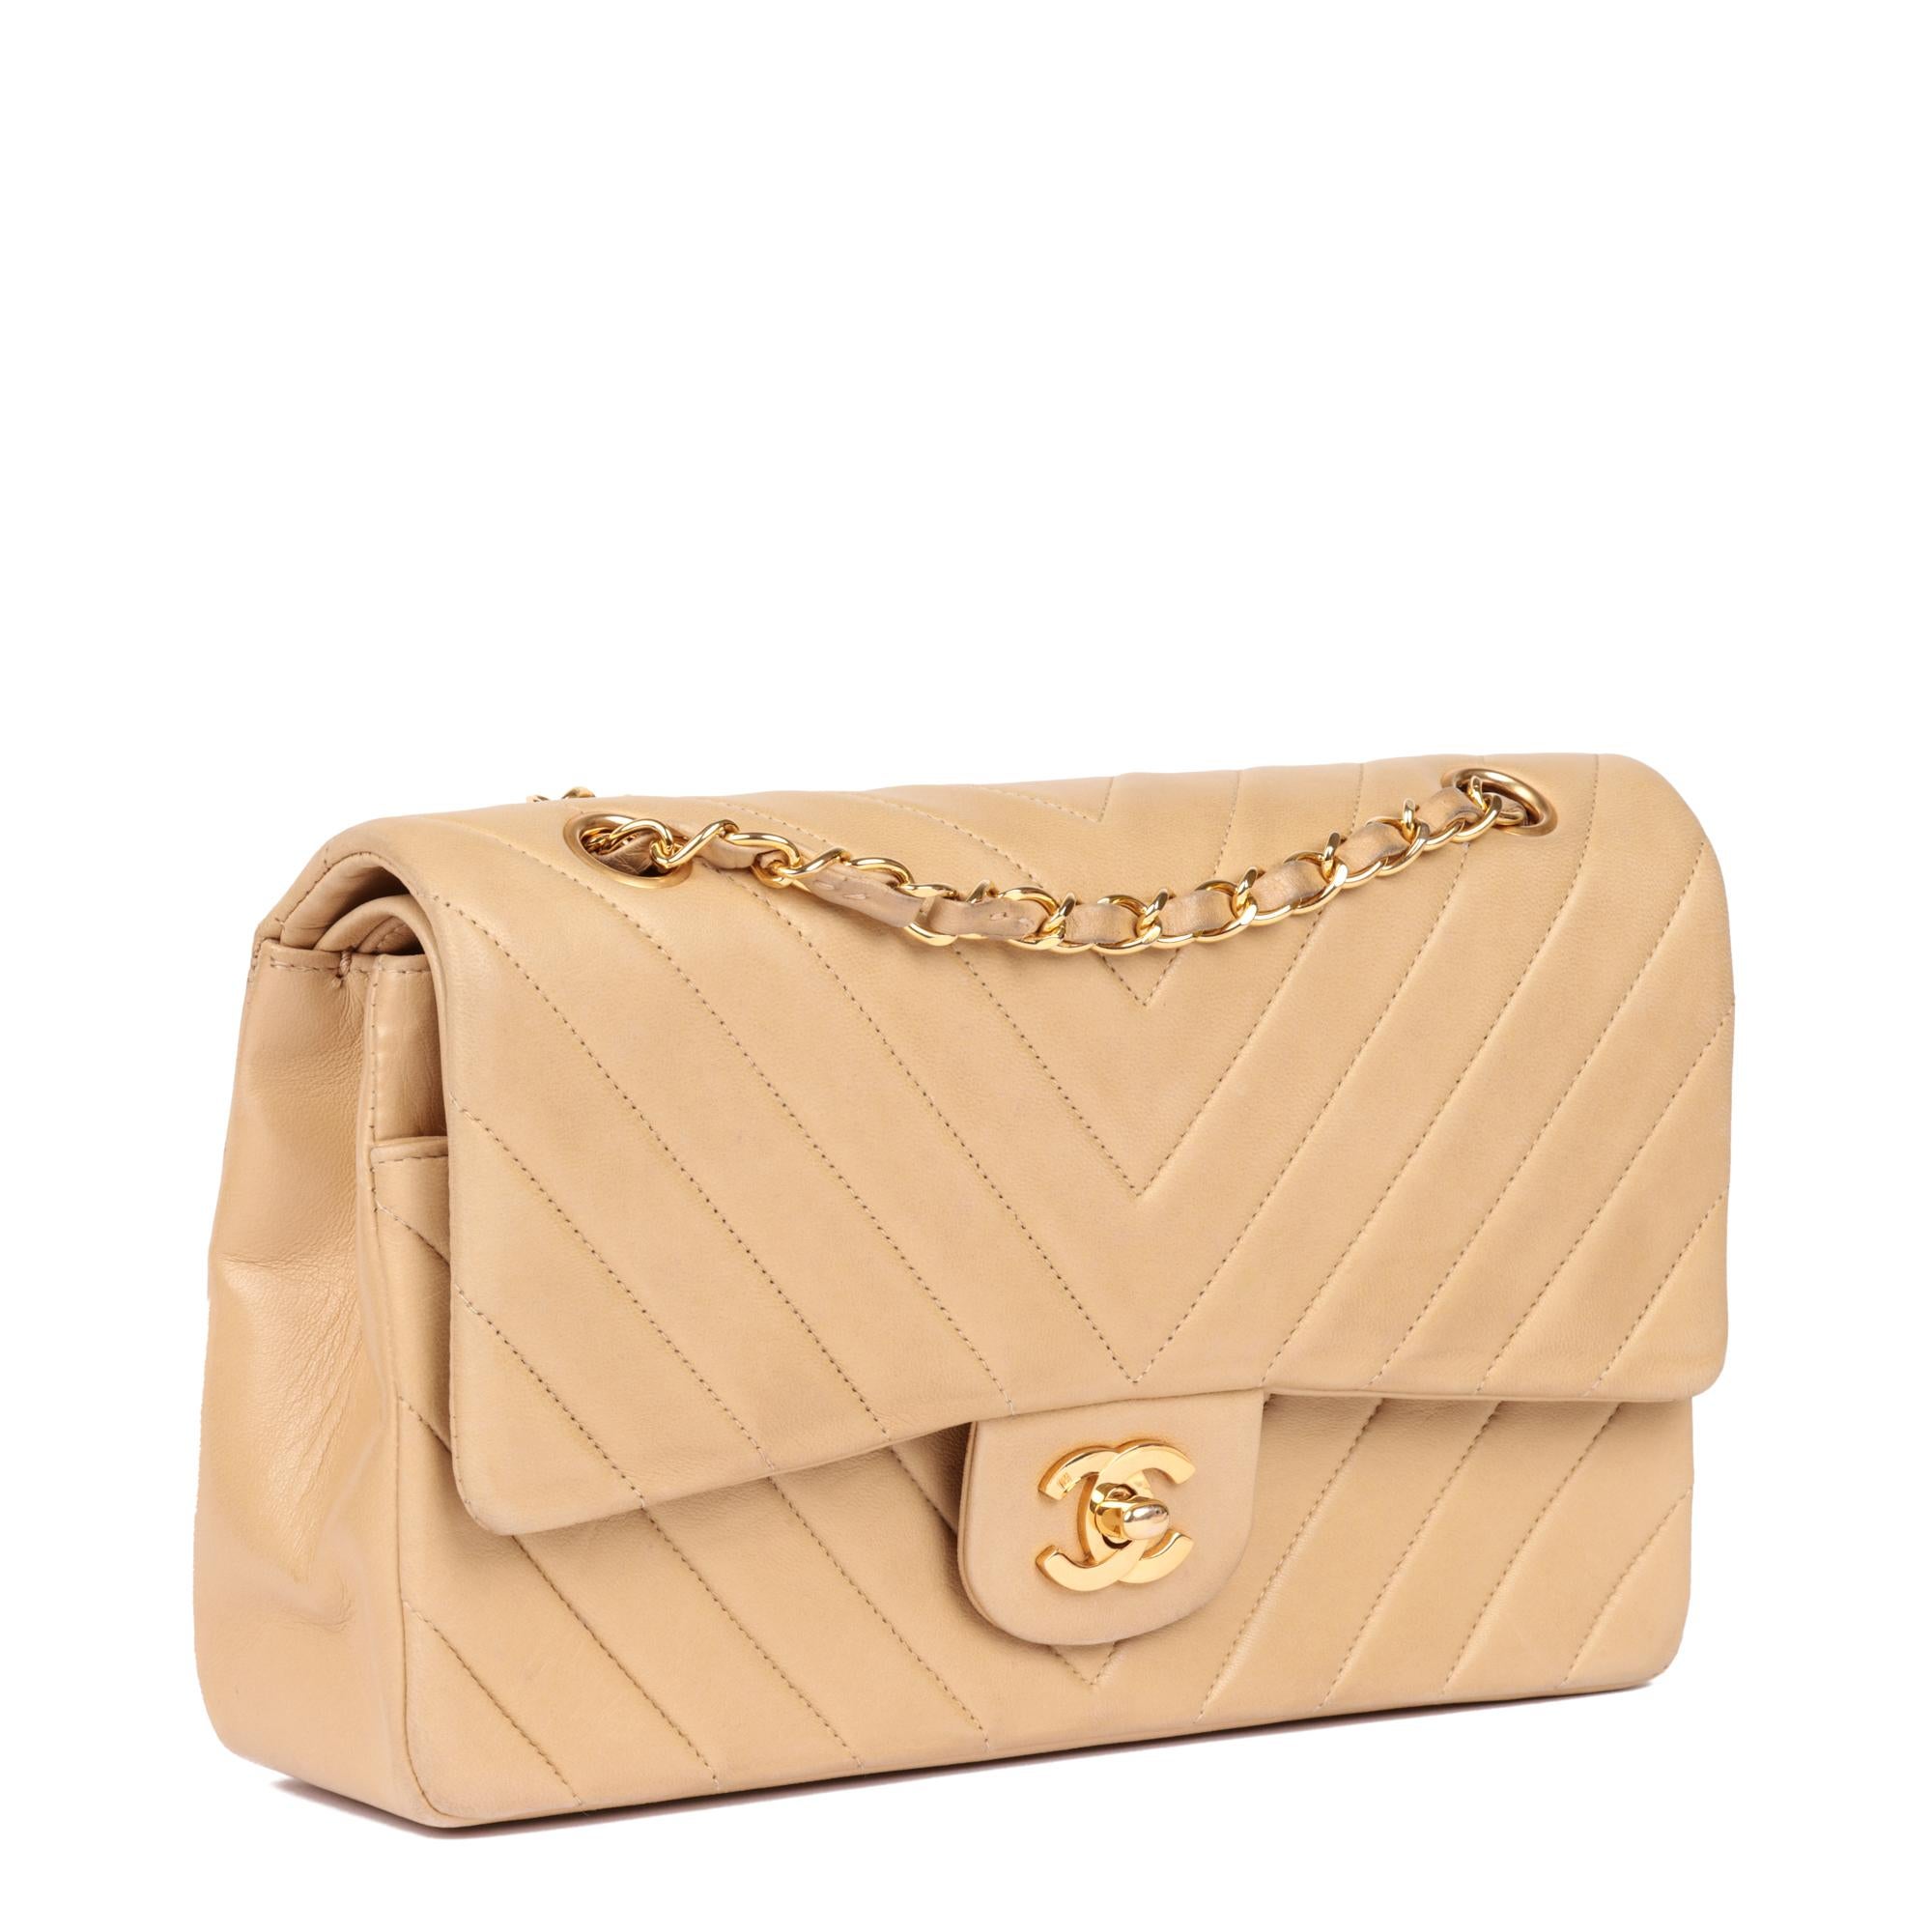 CHANEL
Beige Chevron Quilted Lambskin Vintage Medium Classic Double Flap Bag

Xupes Reference: HB5125
Serial Number: 1916902
Age (Circa): 1989
Accompanied By: Chanel Dust Bag, Authenticity Card
Authenticity Details: Authenticity Card, Serial Sticker